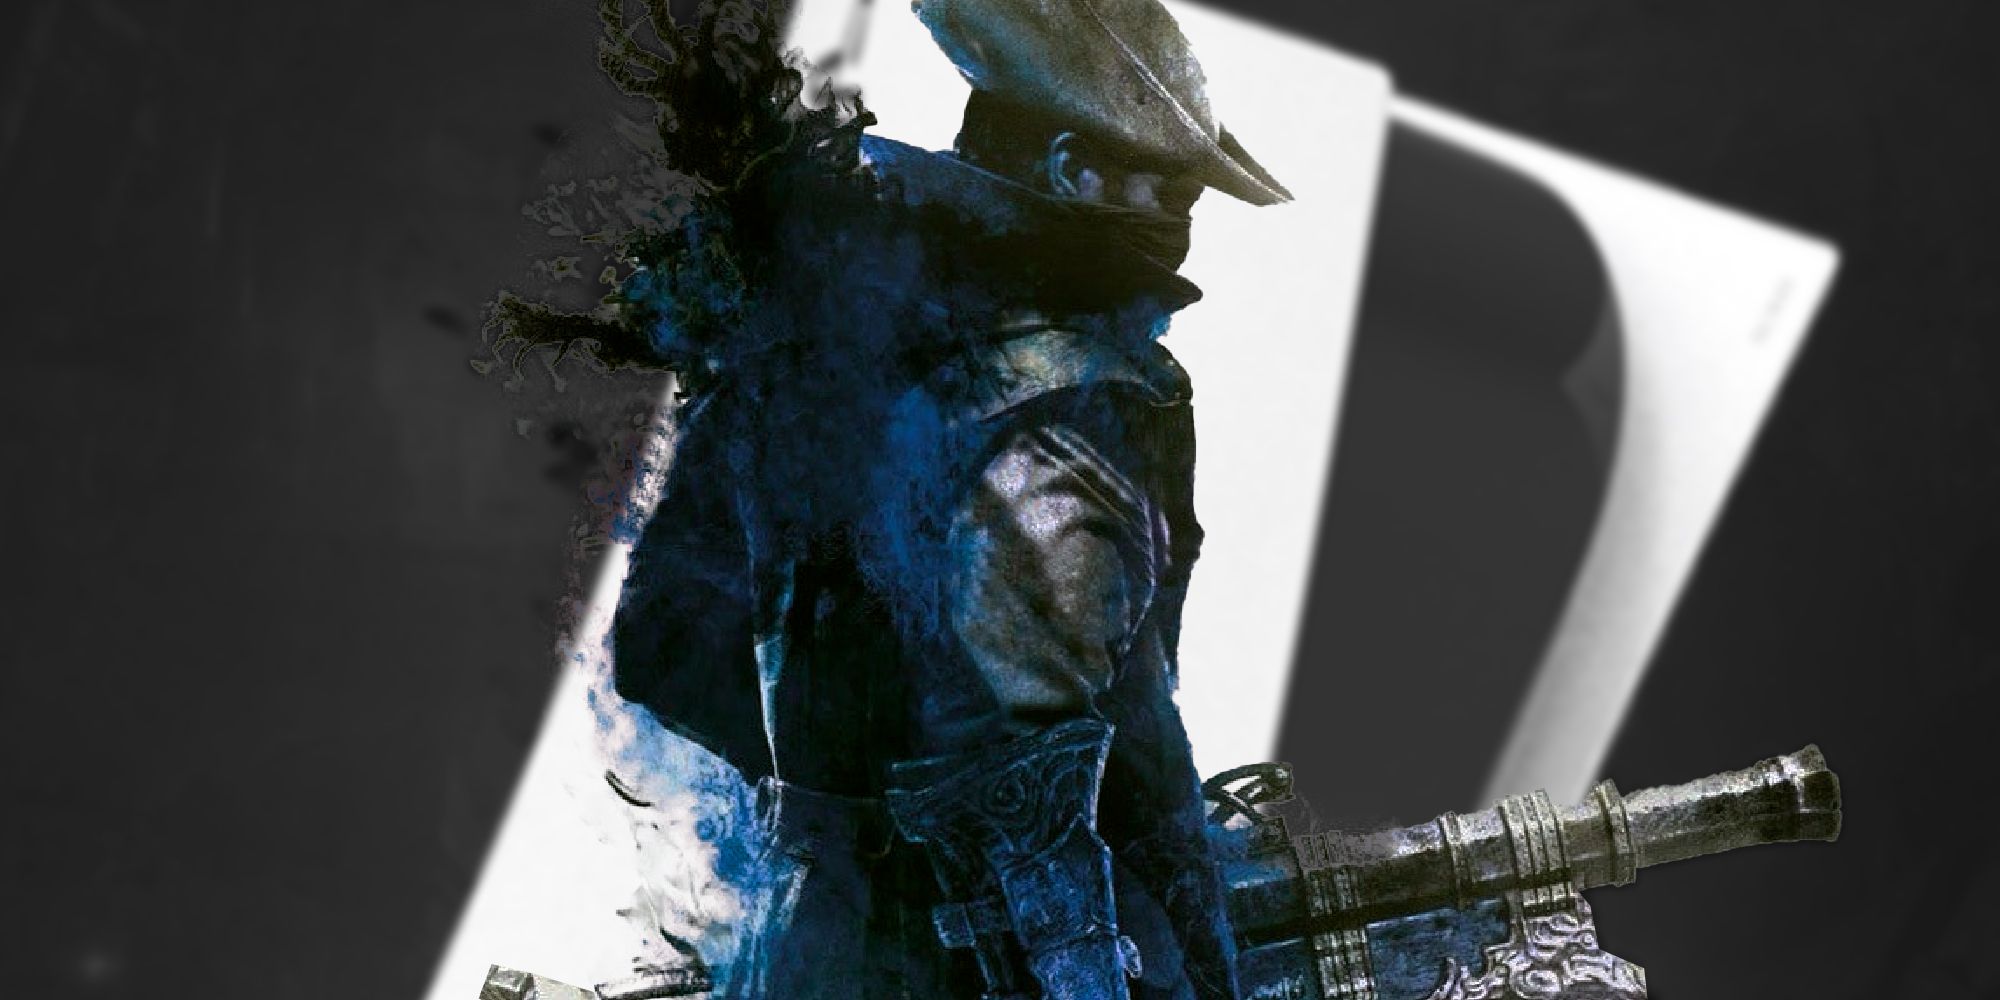 Rumor: Bloodborne remaster coming to PS5 and PC - Neoseeker